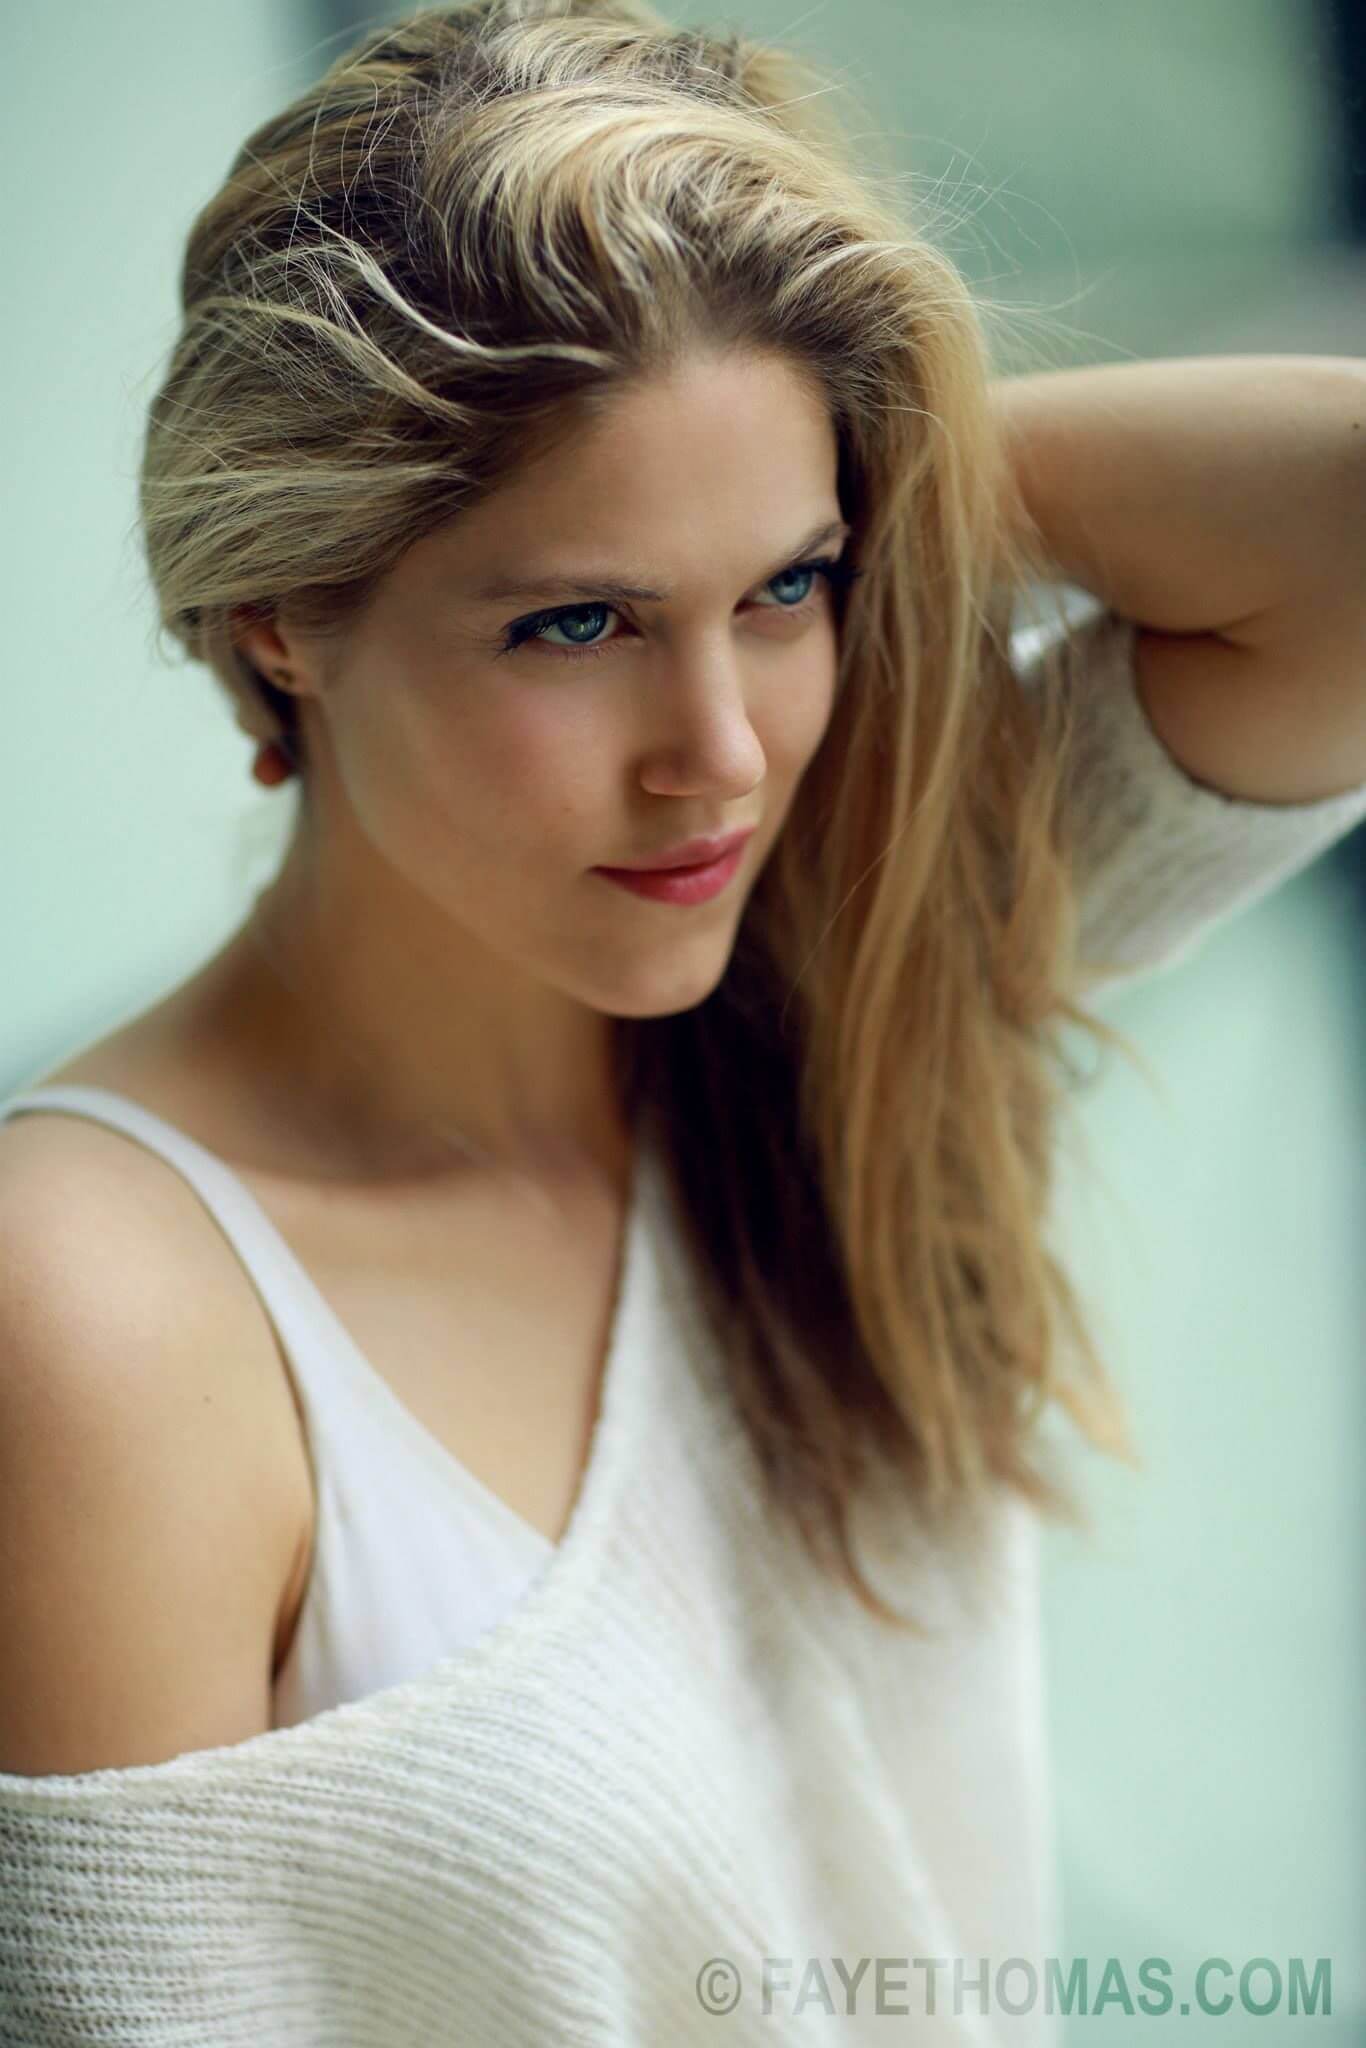 49 Hot Pictures Of Charity Wakefield Which Expose Her Sexy Hour-glass Figure | Best Of Comic Books